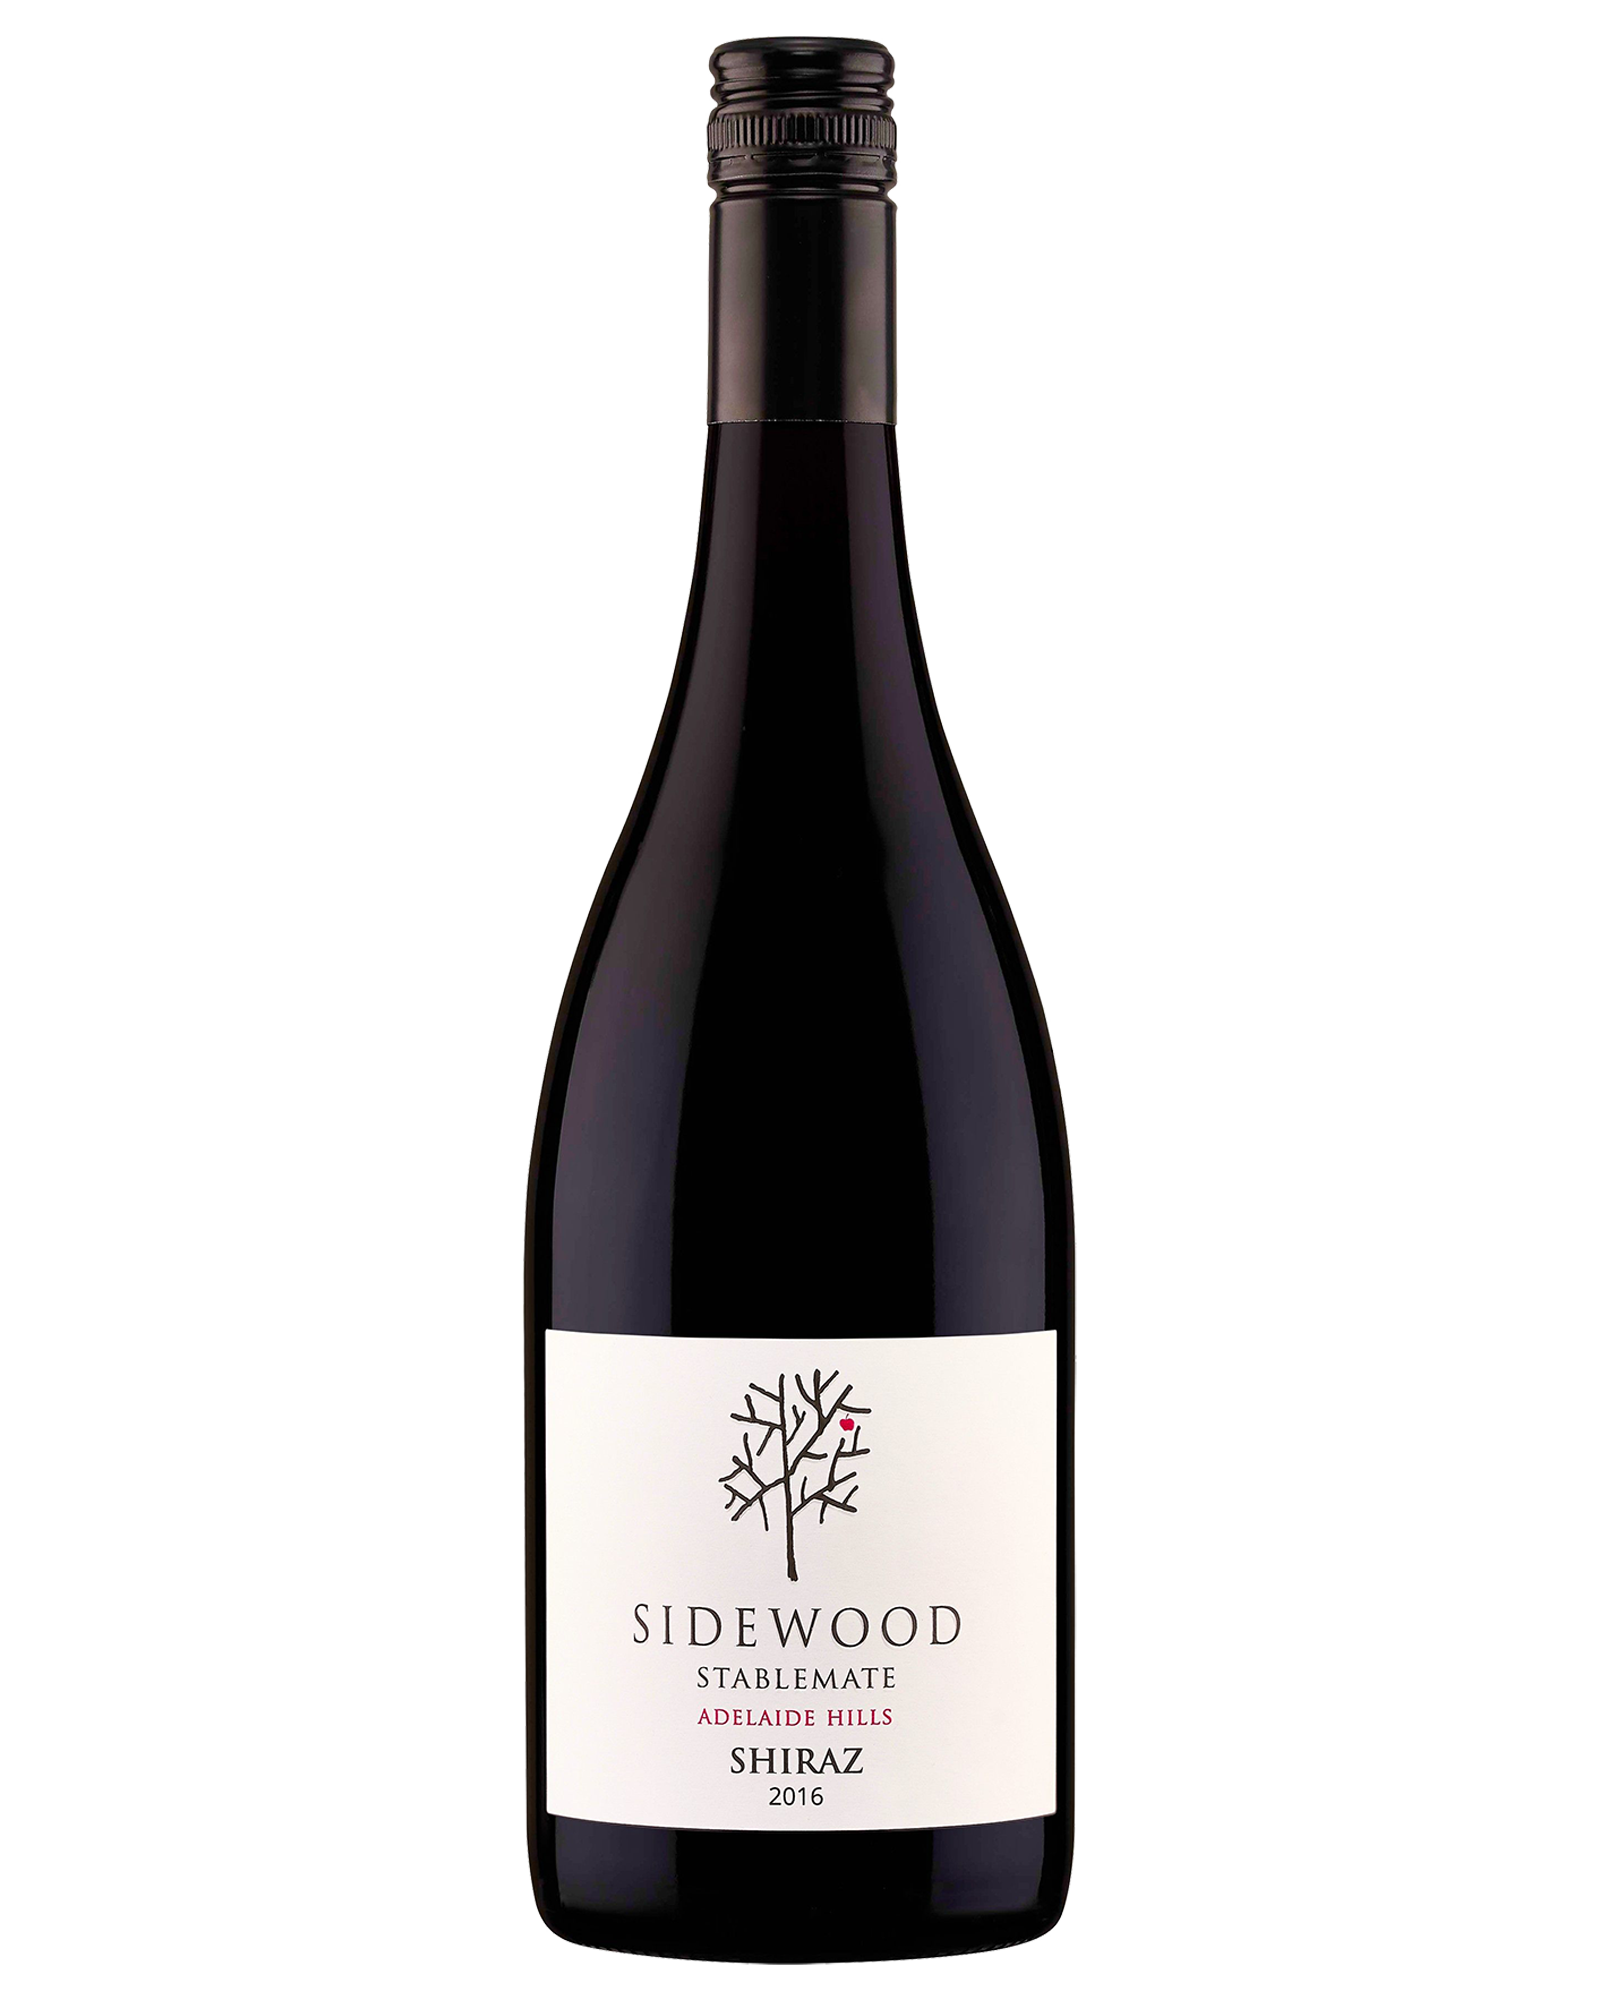 Sidewood Stablemate Adelaide Hills Shiraz